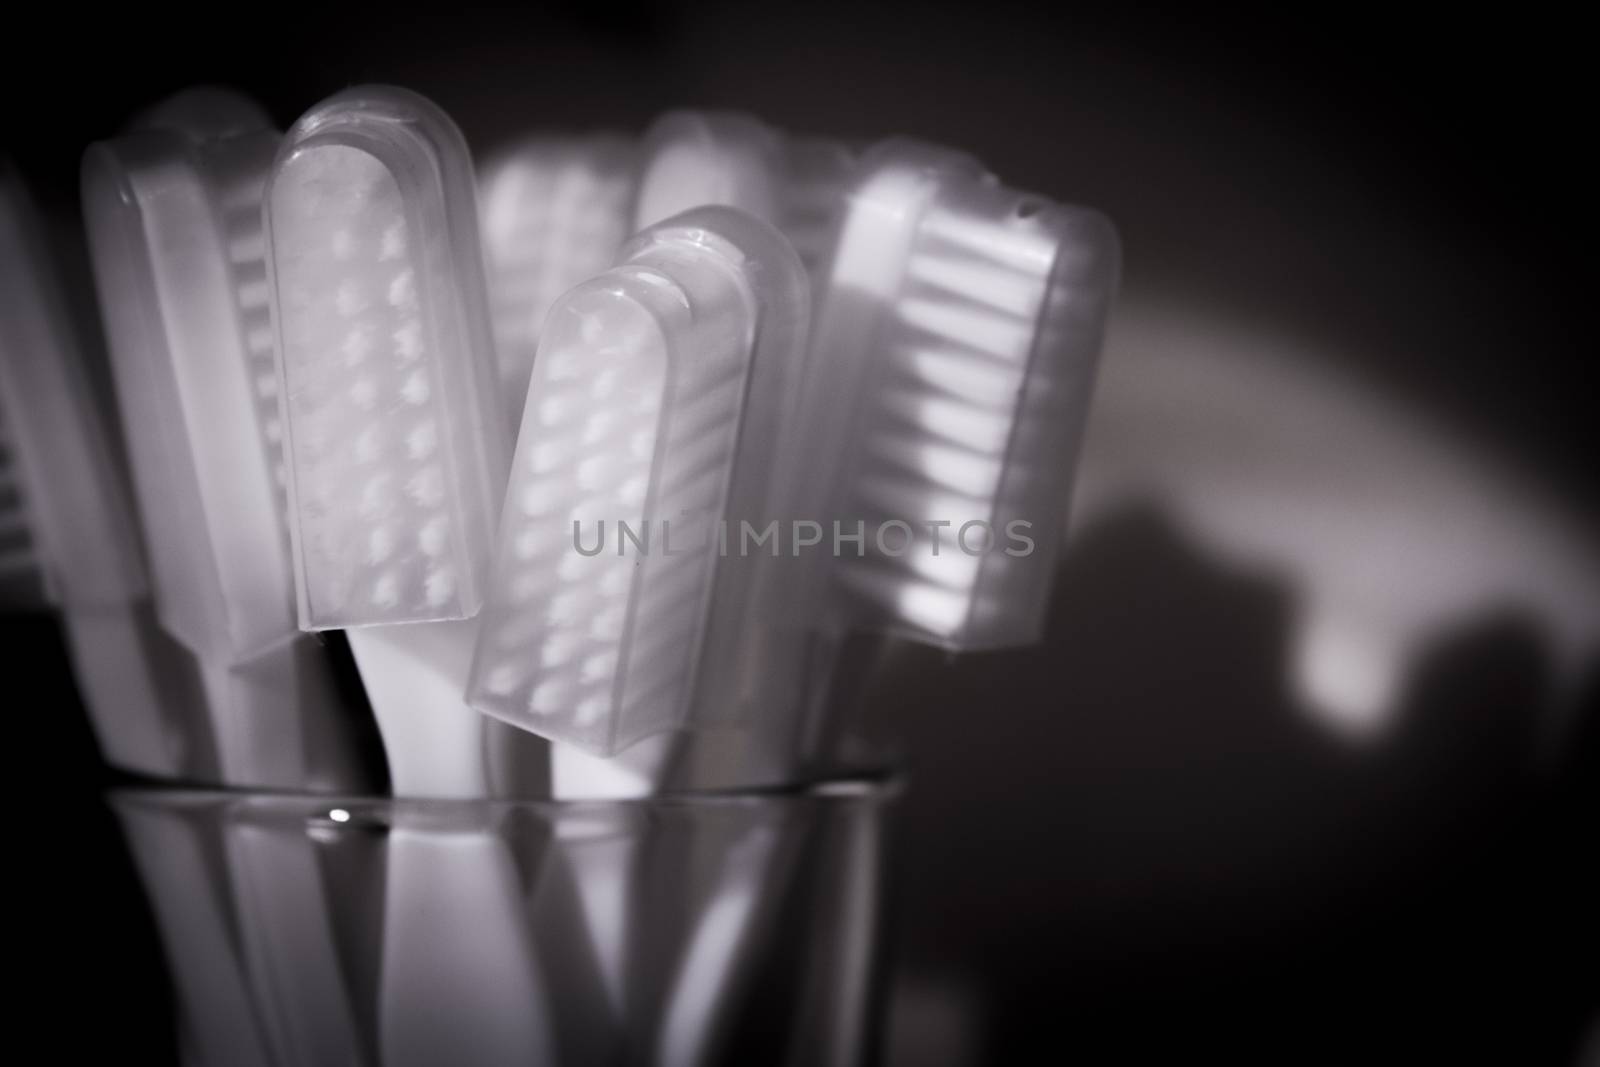 Toothbrushes in a glass. Black background.